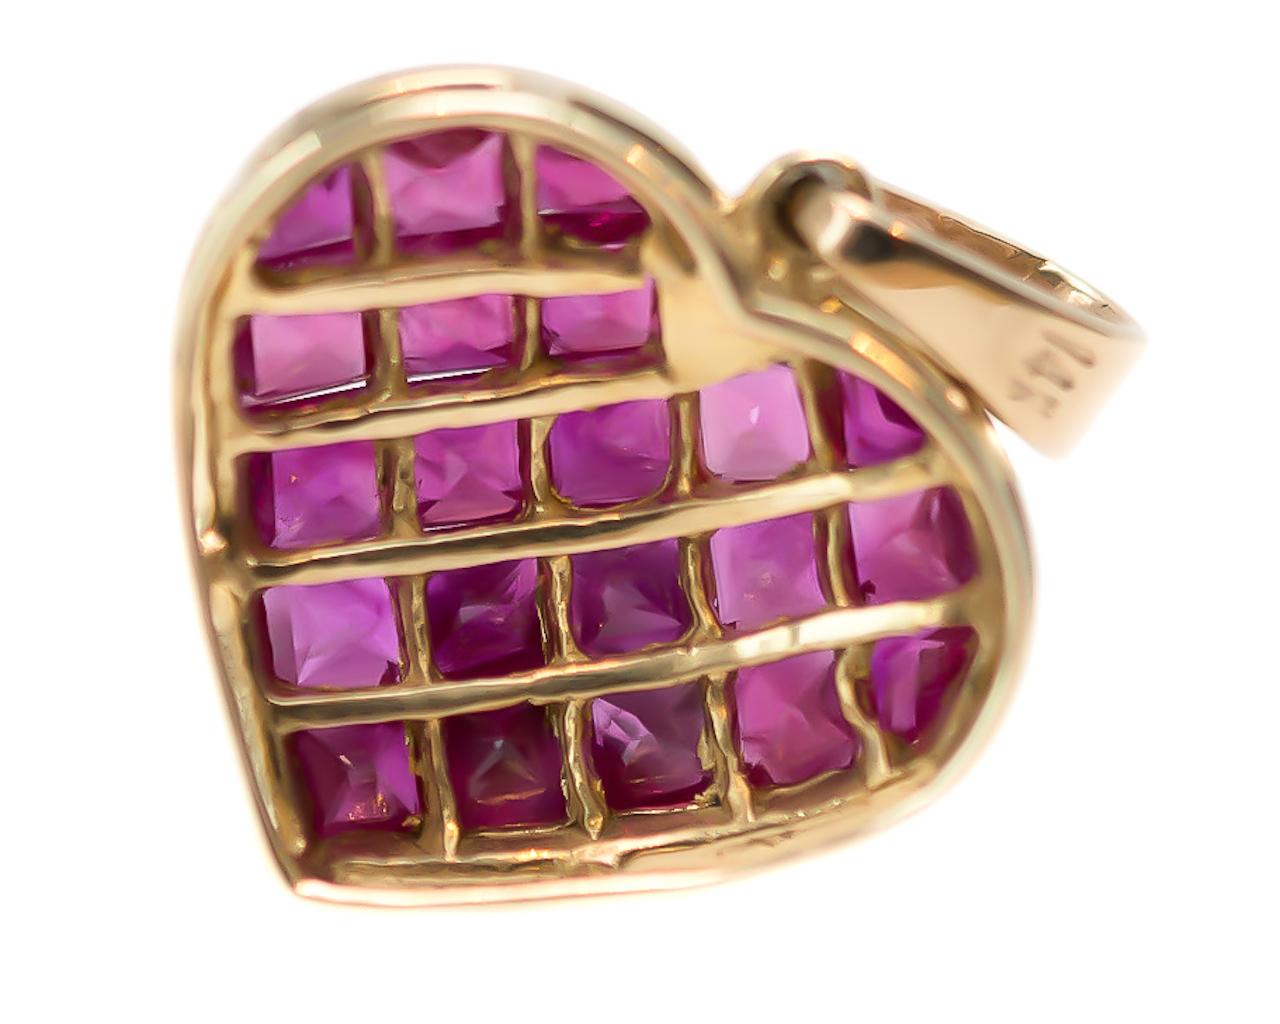 1970s Ruby Heart Pendant - 14 Karat Yellow Gold, Rubies

Features:
1.0 carat total Princess cut Rubies
Pinkish Red Rubies
14 Karat Yellow Gold
Puffed Design with Open Gallery 
Rubies are Invisible Set in a Diamond Pattern

Heart Measures 14